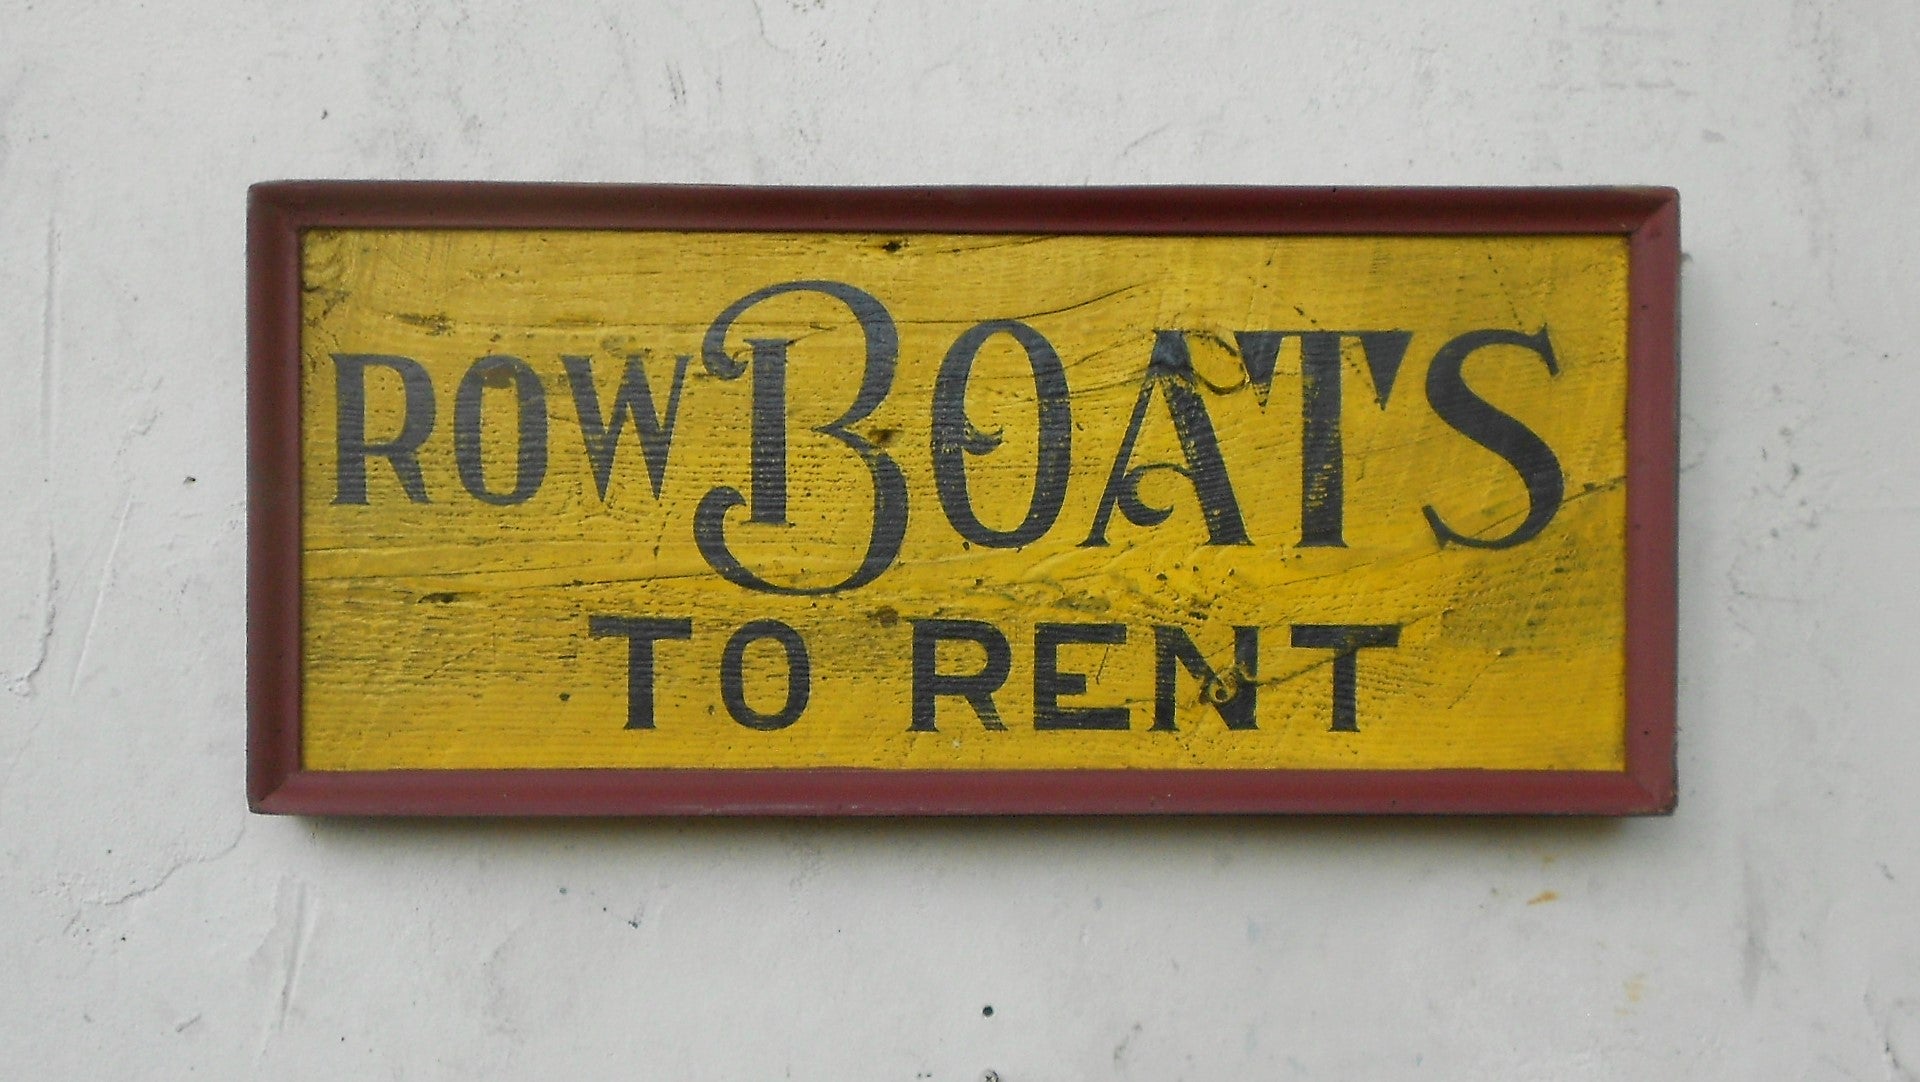 Row Boats to Rent